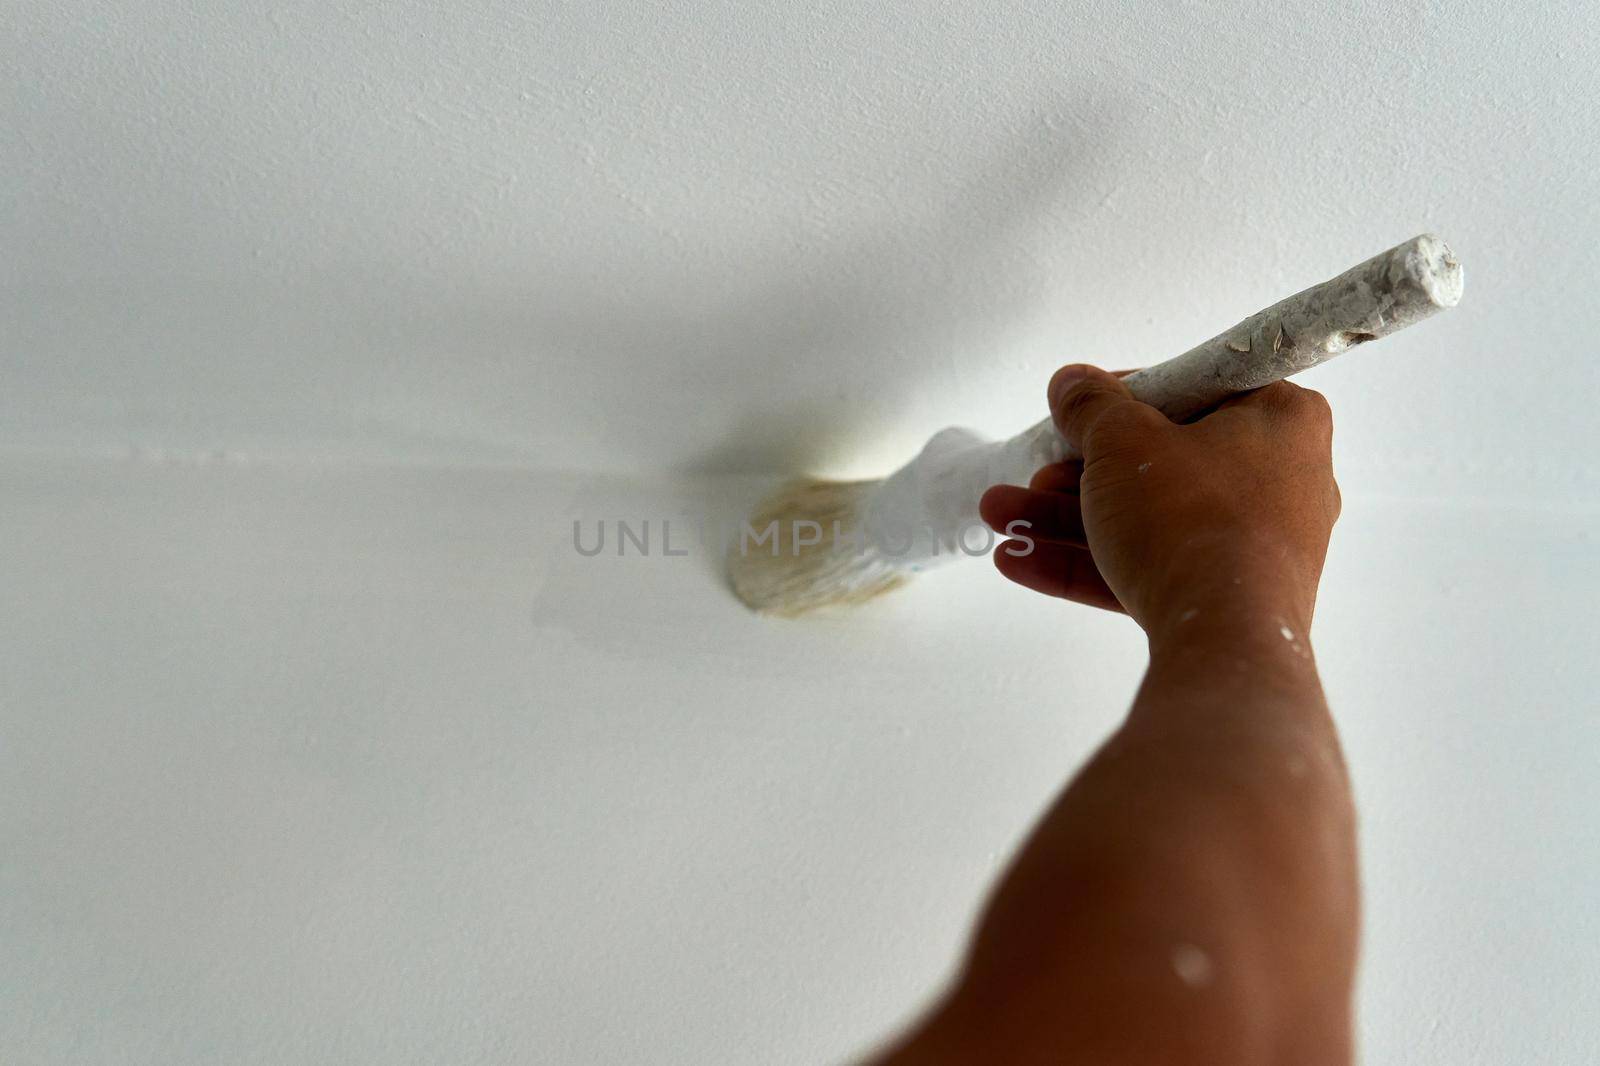 Painter painting a room by xavier_photo